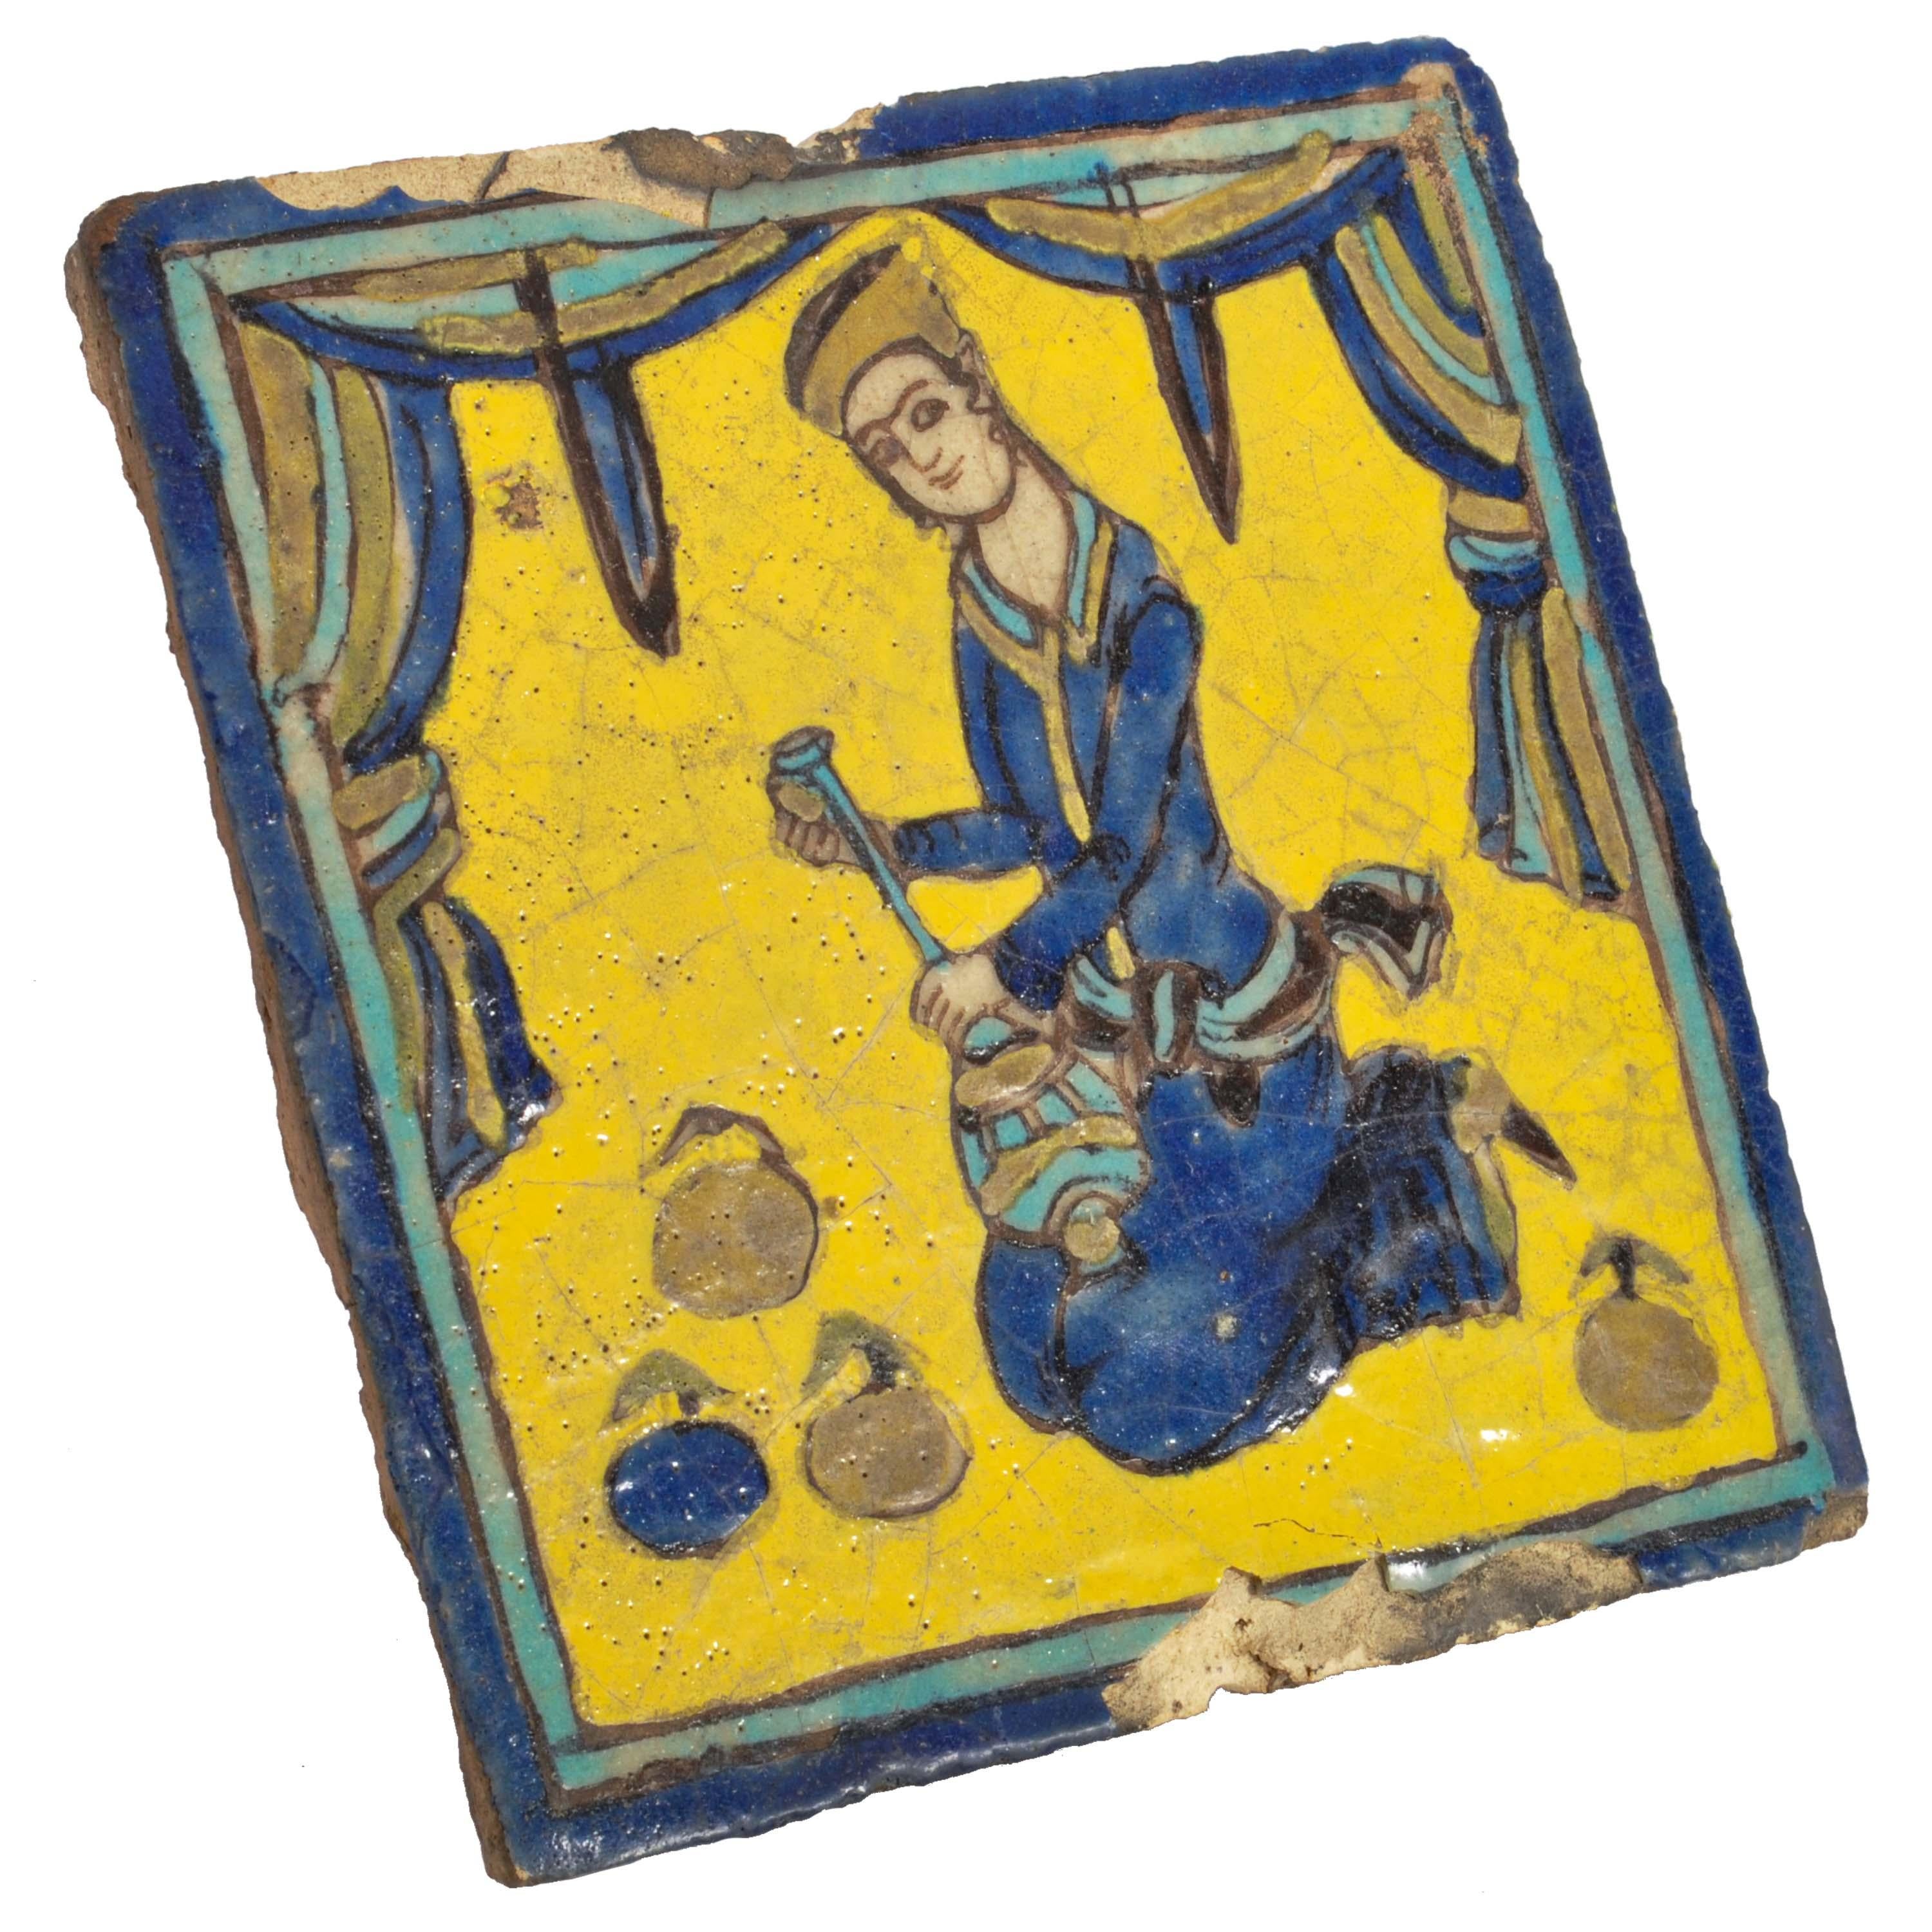 An antique Persian late Safavid or early Qajar period Islamic Cuerda Seca Pottery tile, circa 1780.
The tile of square form with a yellow ground with polychrome decoration of a musician playing a Persian setar. 
Condition is good, minor nibbles to